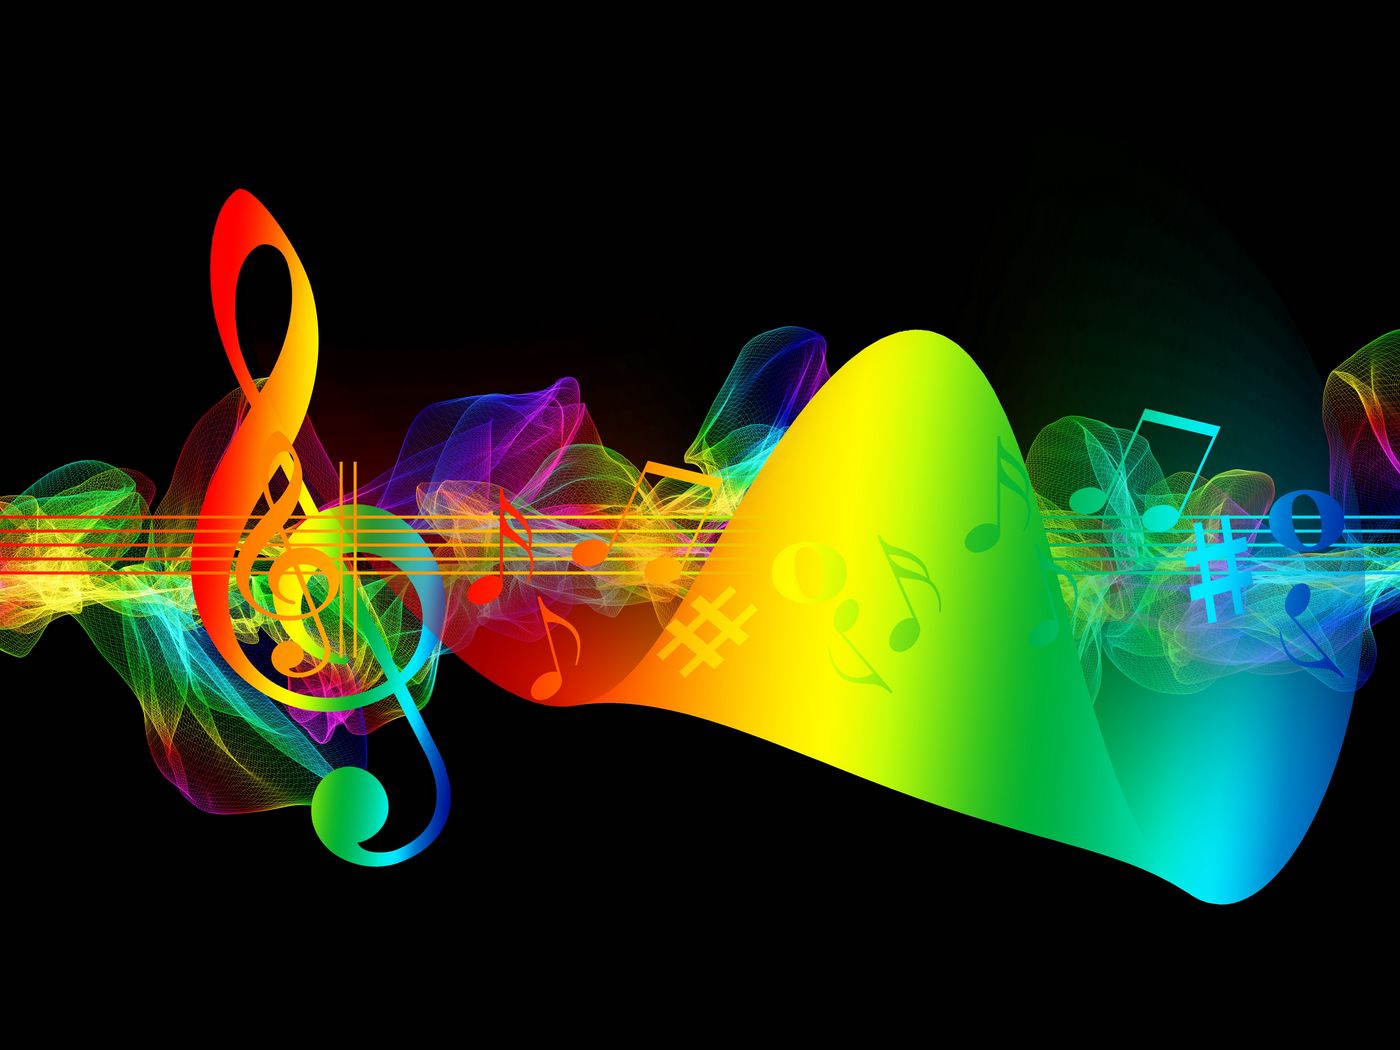 Download wallpaper 1400x1050 treble clef, musical notes, multicolored, rainbow standard 4:3 HD background